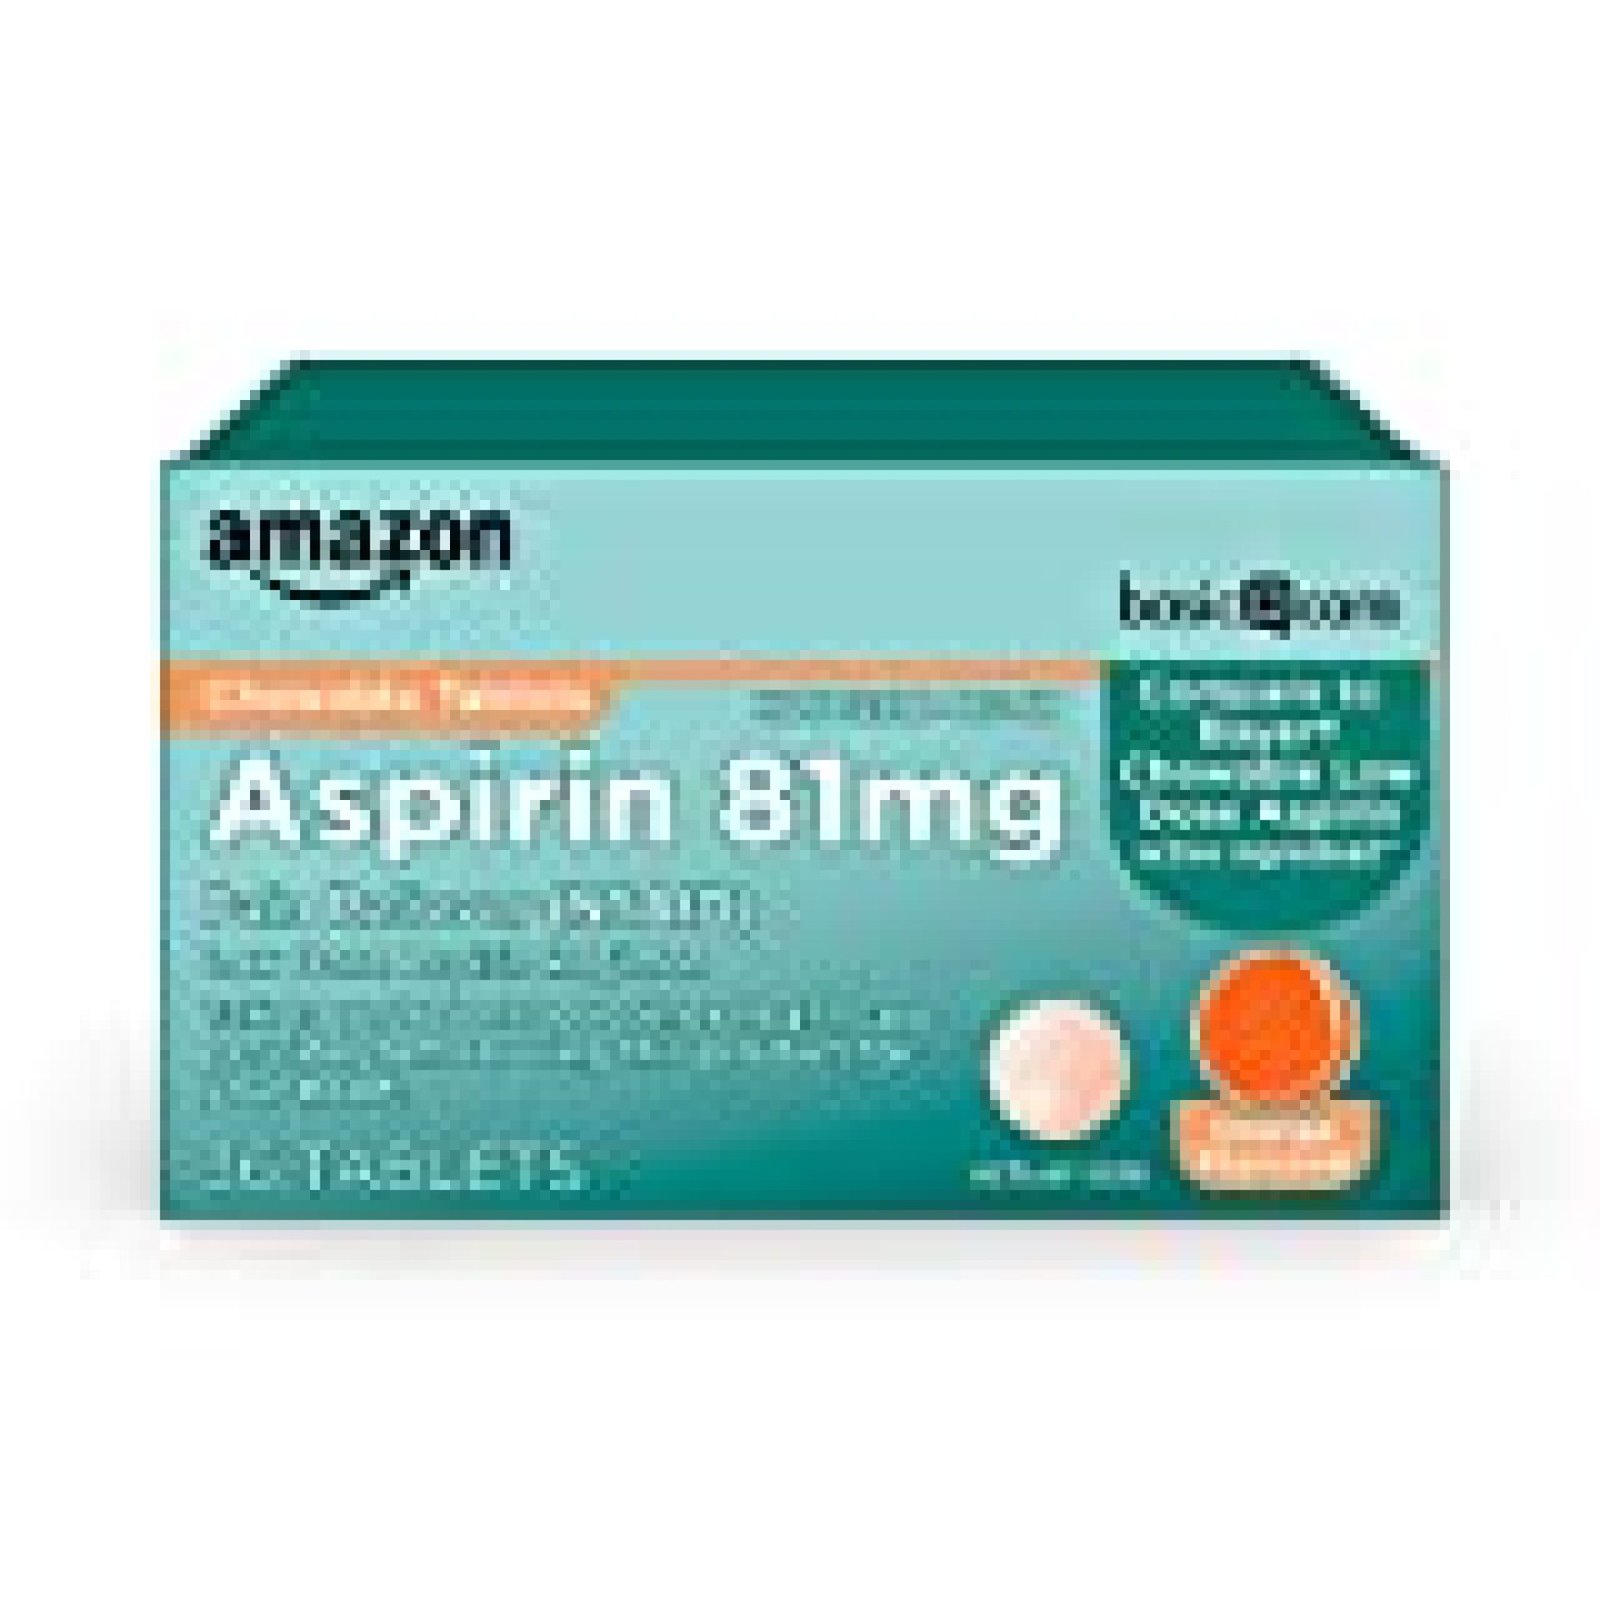 Amazon Basic Care Aspirin 81 mg Pain Reliever (NSAID) Chewable Tablets ...